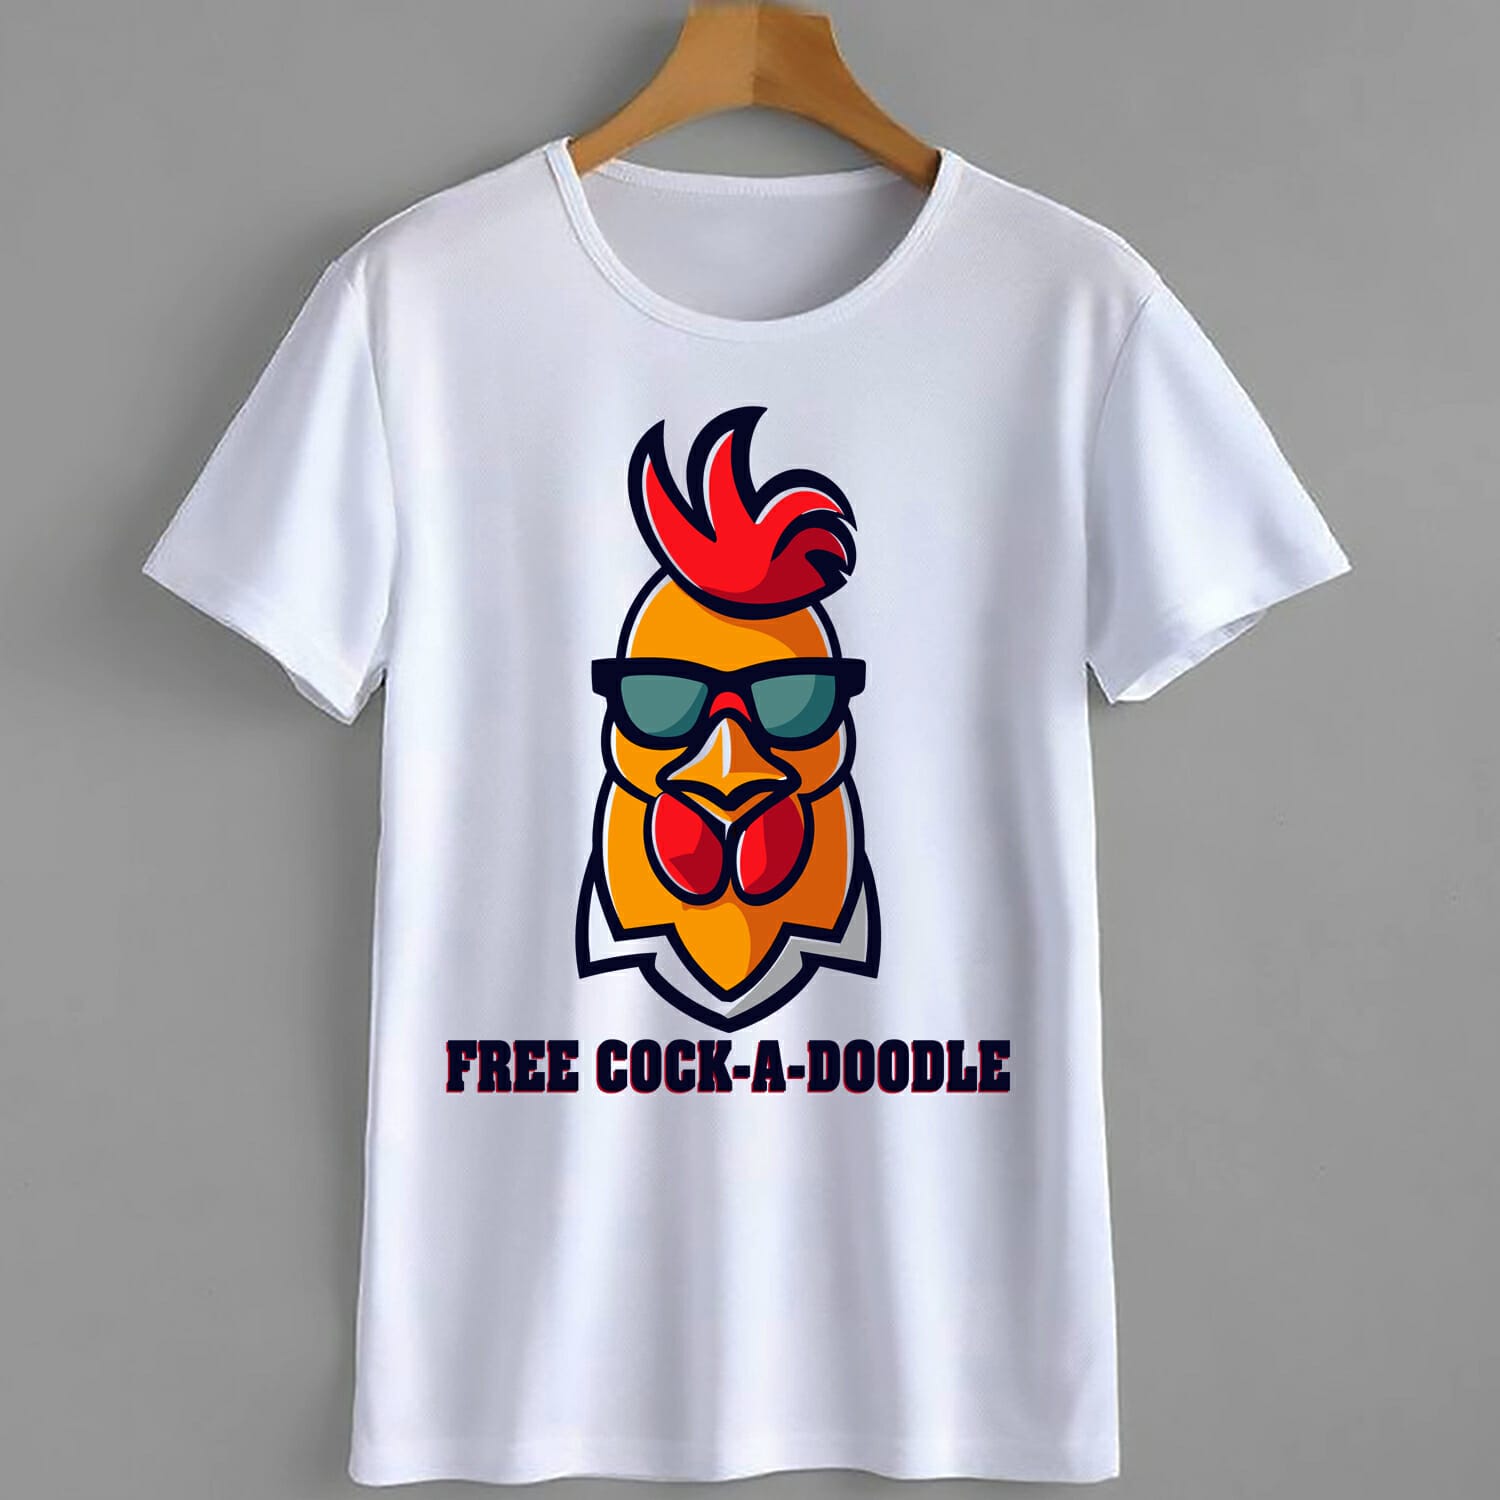 Free Cock-A-Doodle Rooster T-Shirt Design